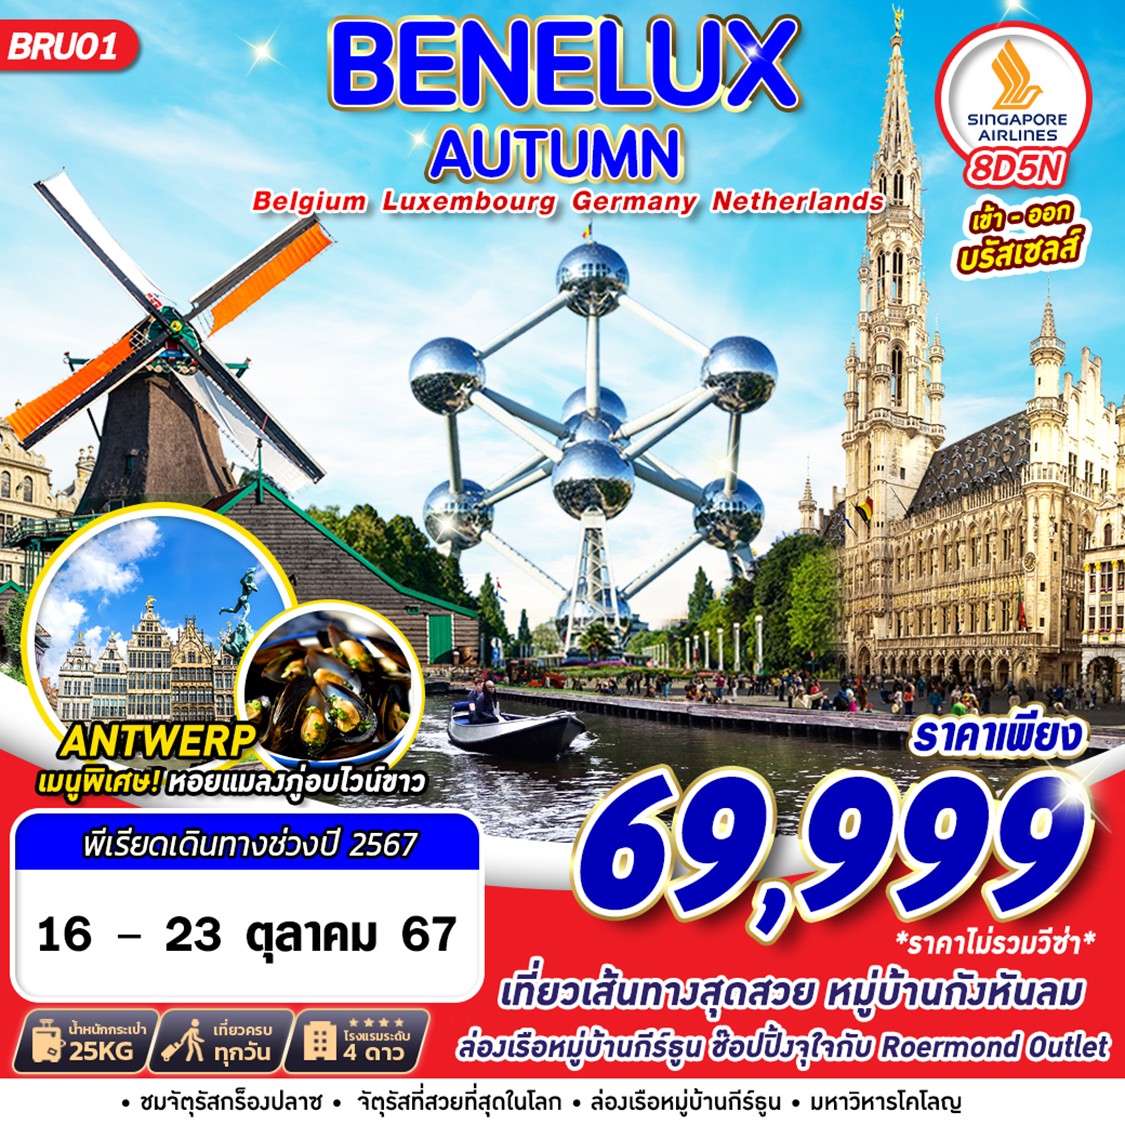 BENELUX AUTUMN BELGIUM LUXEMBOURG GERMANY NATHERLANS 8วัน 5คืน by SINGAPORE AIRLINES